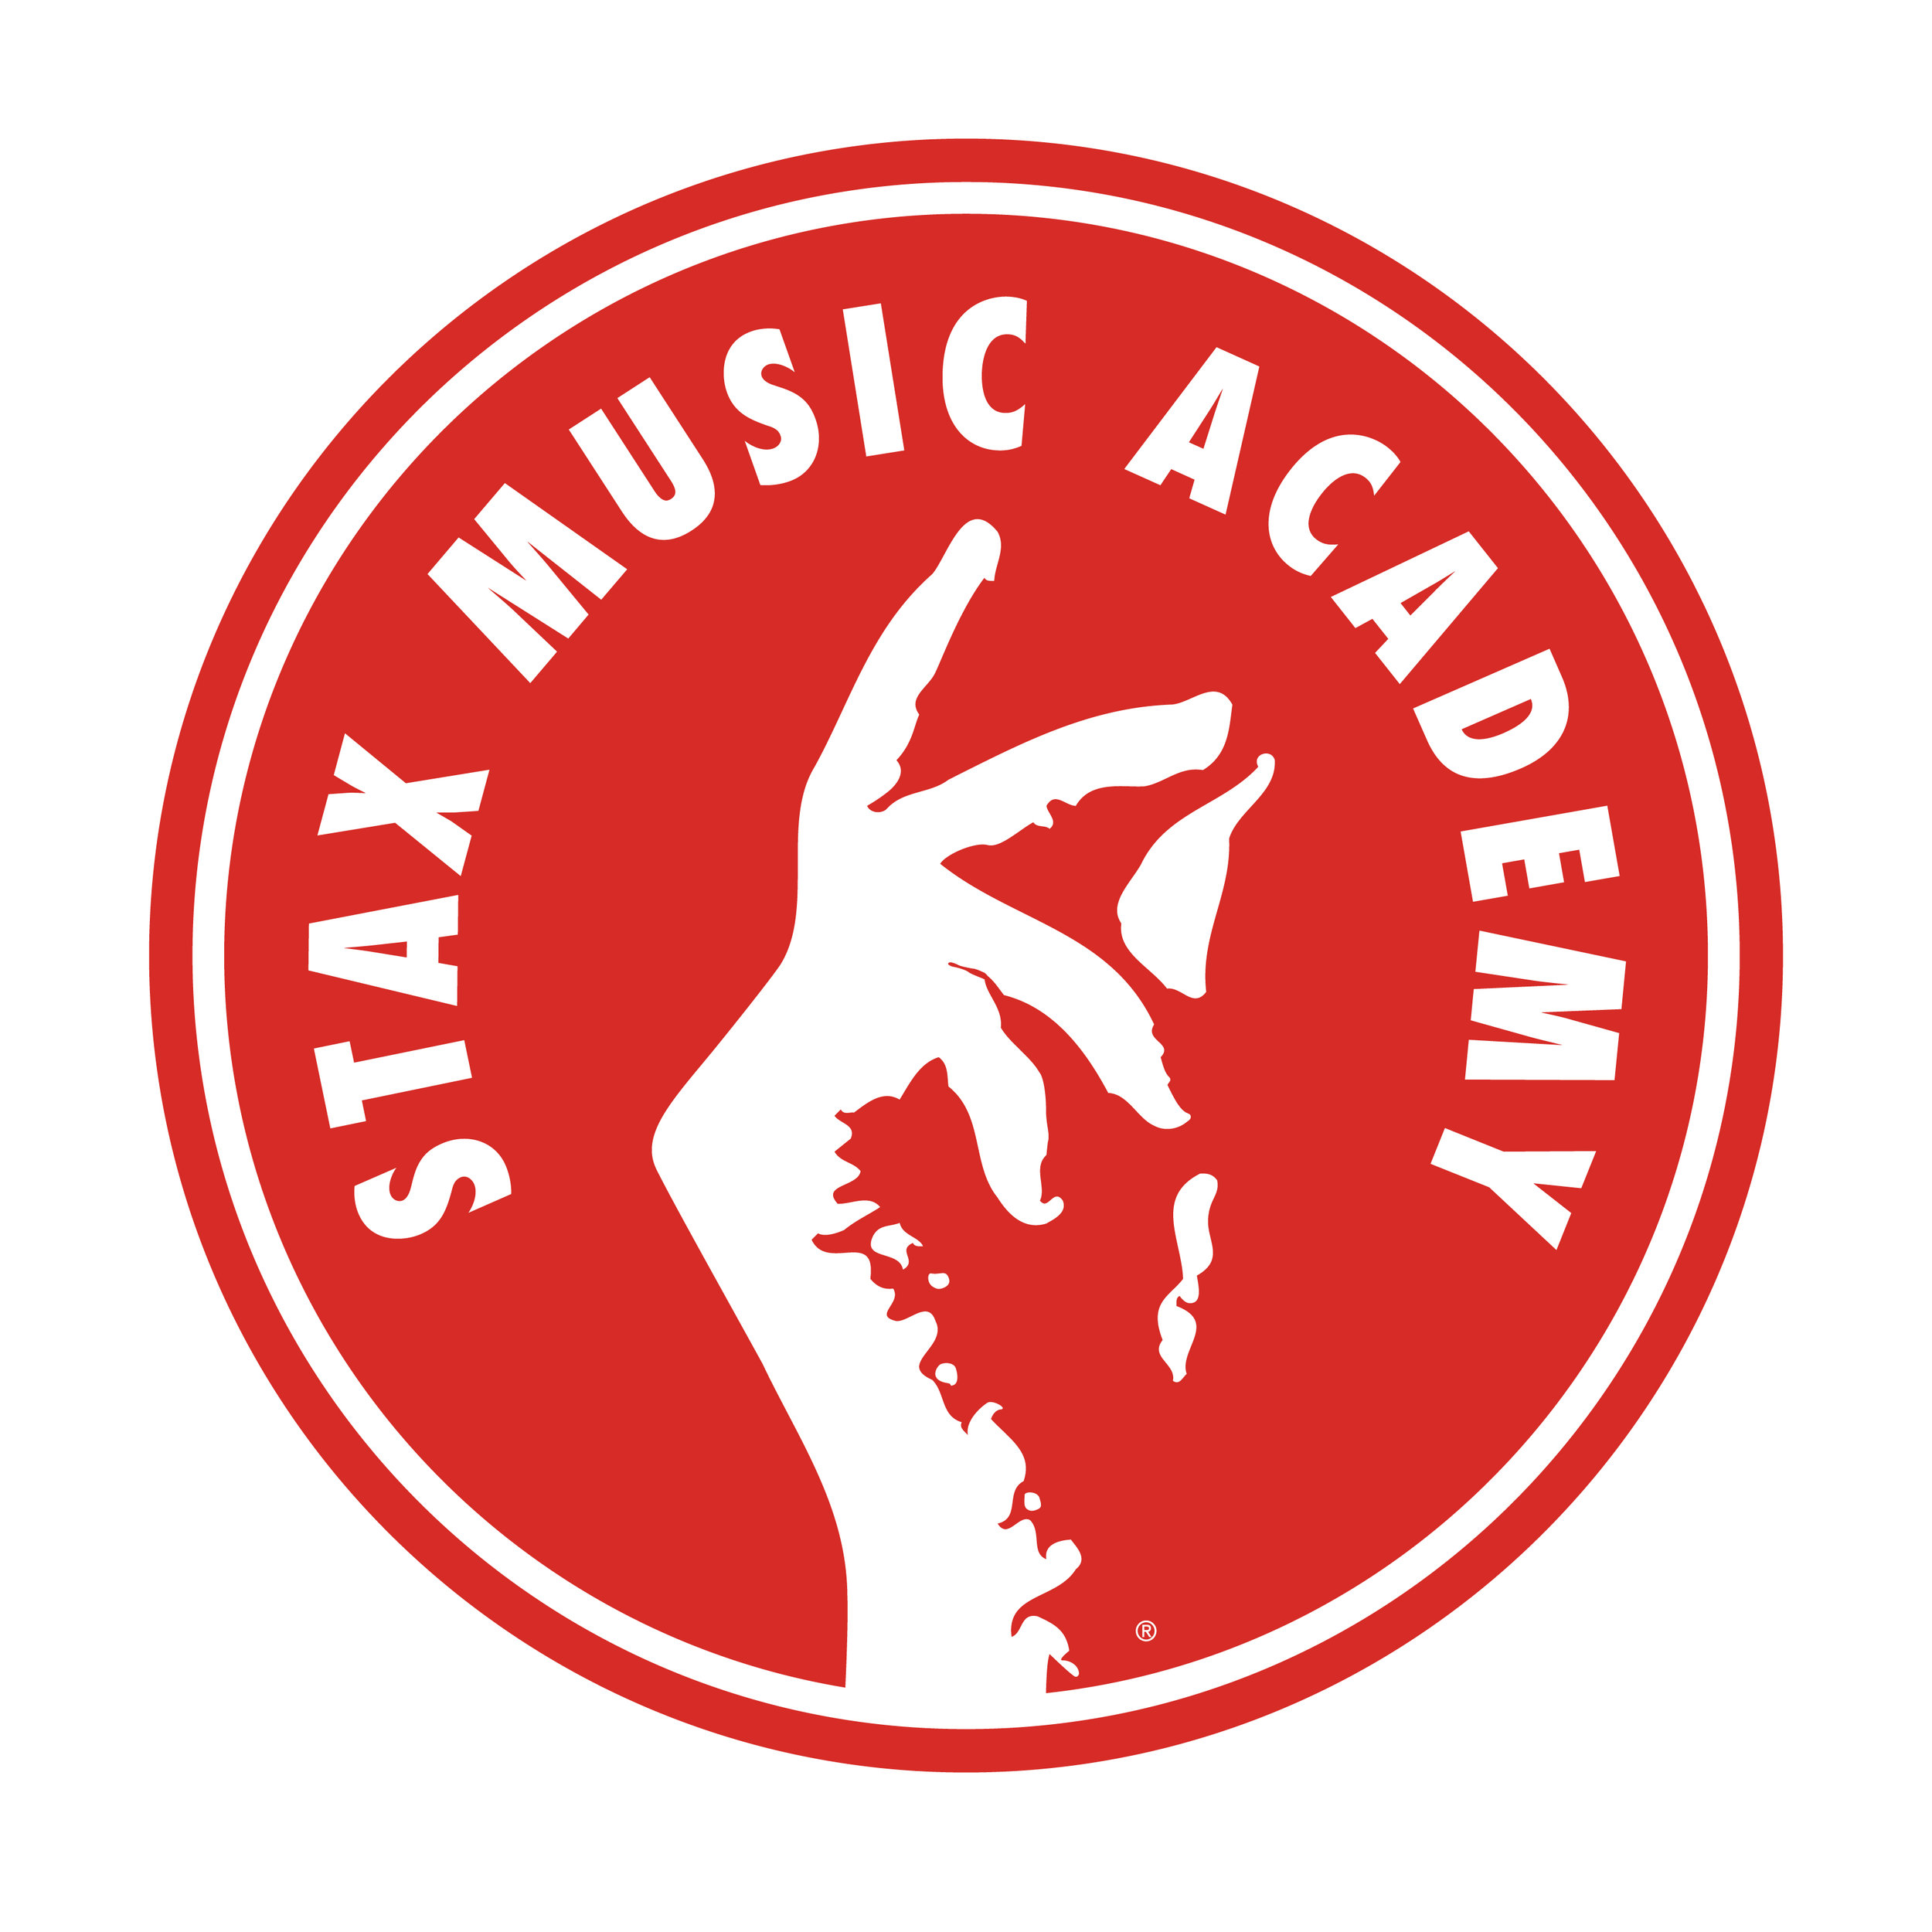  Stax Music Academy logo  Branding creative and design by Chuck Mitchell 